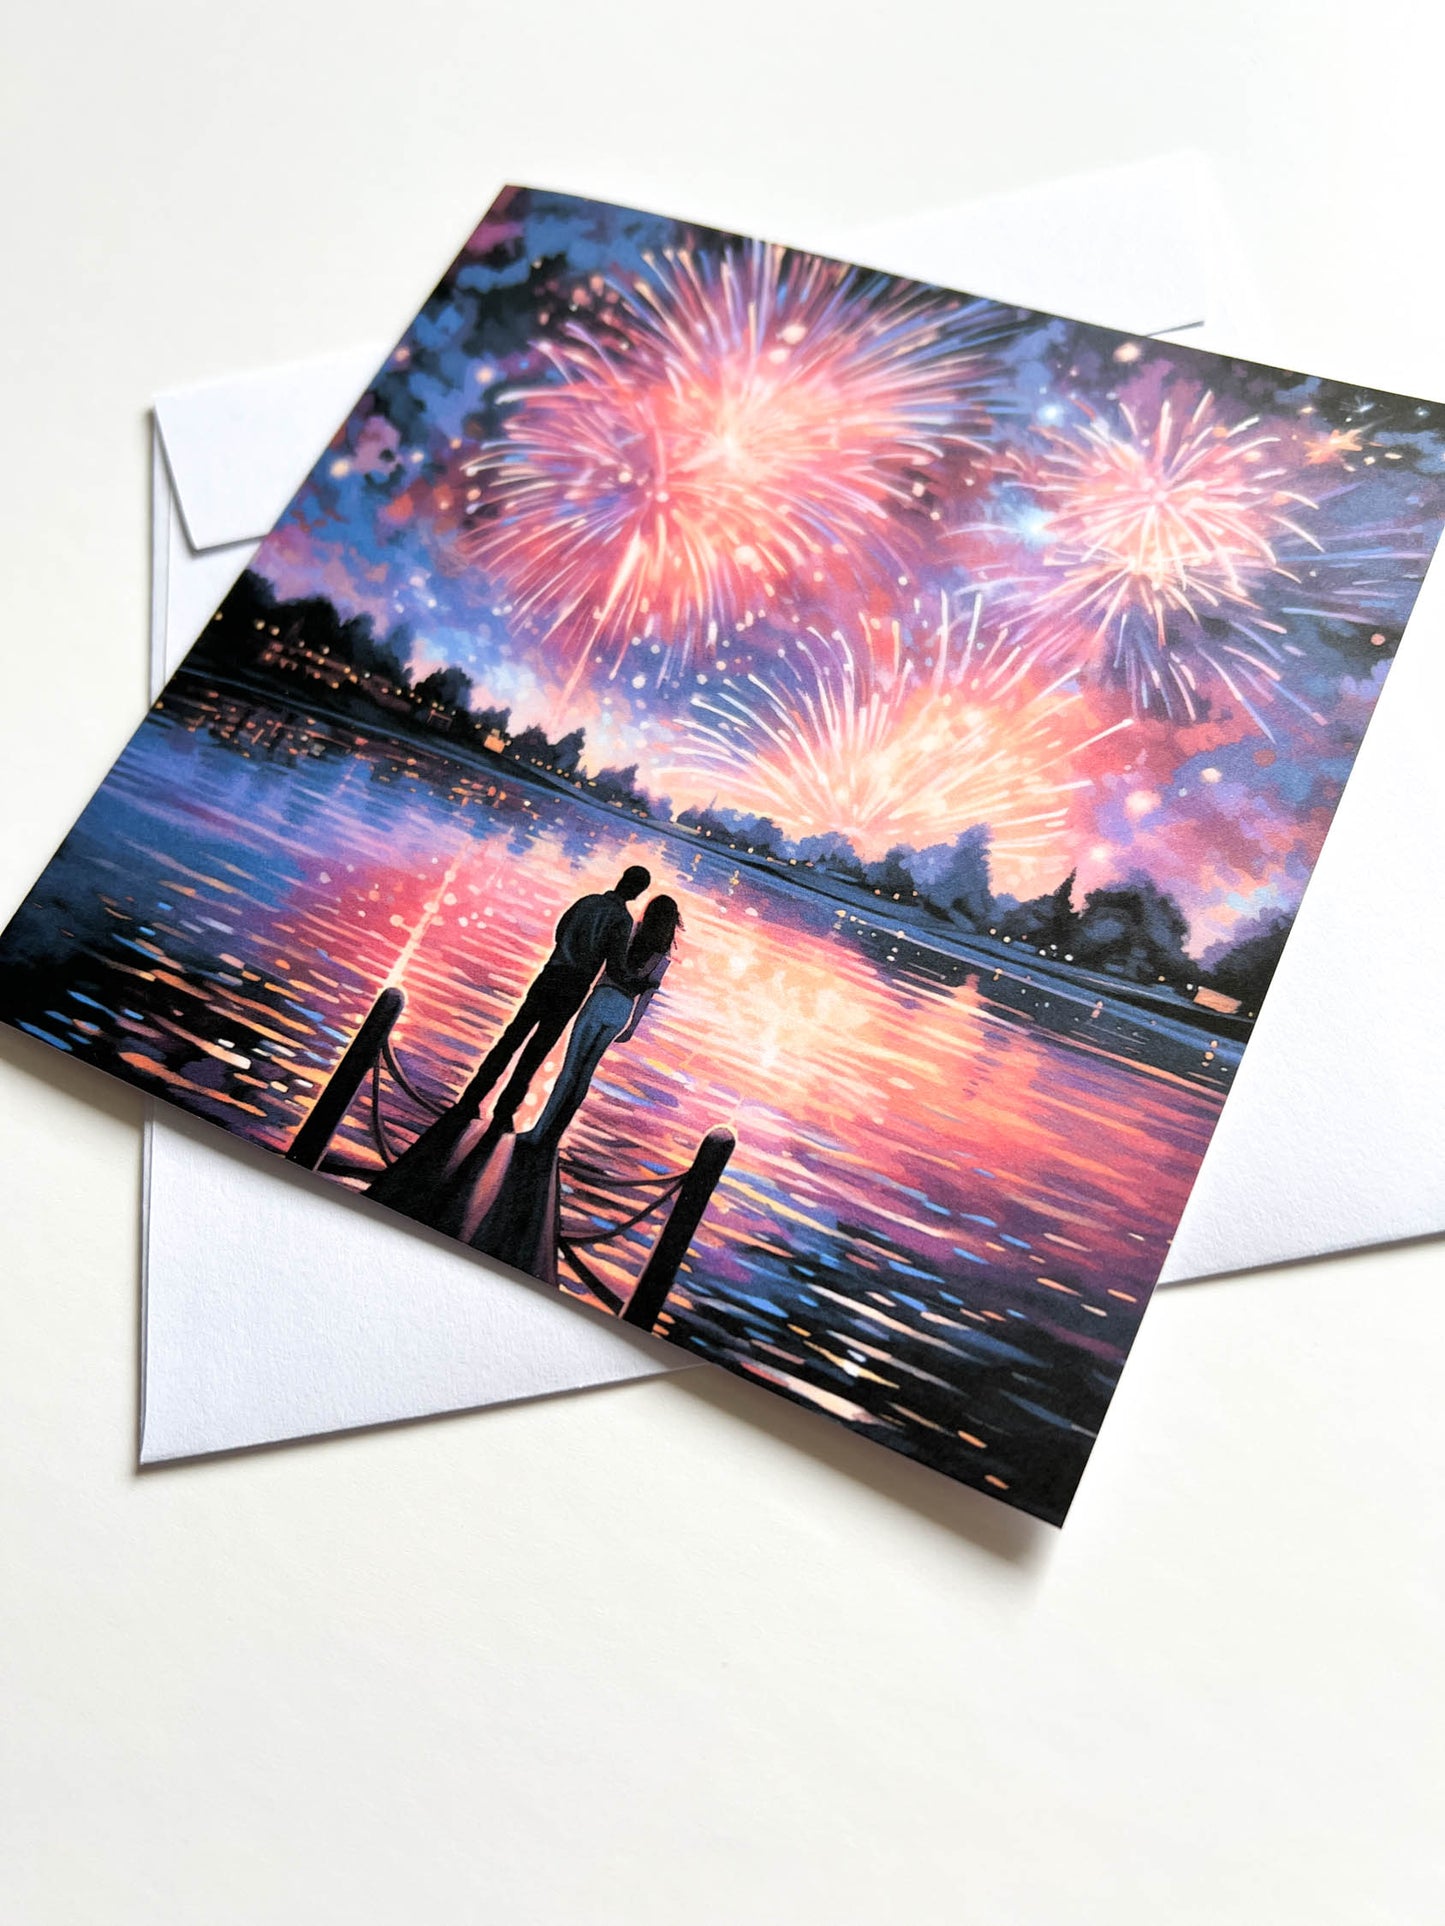 Fireworks over the Lake Greetings Card